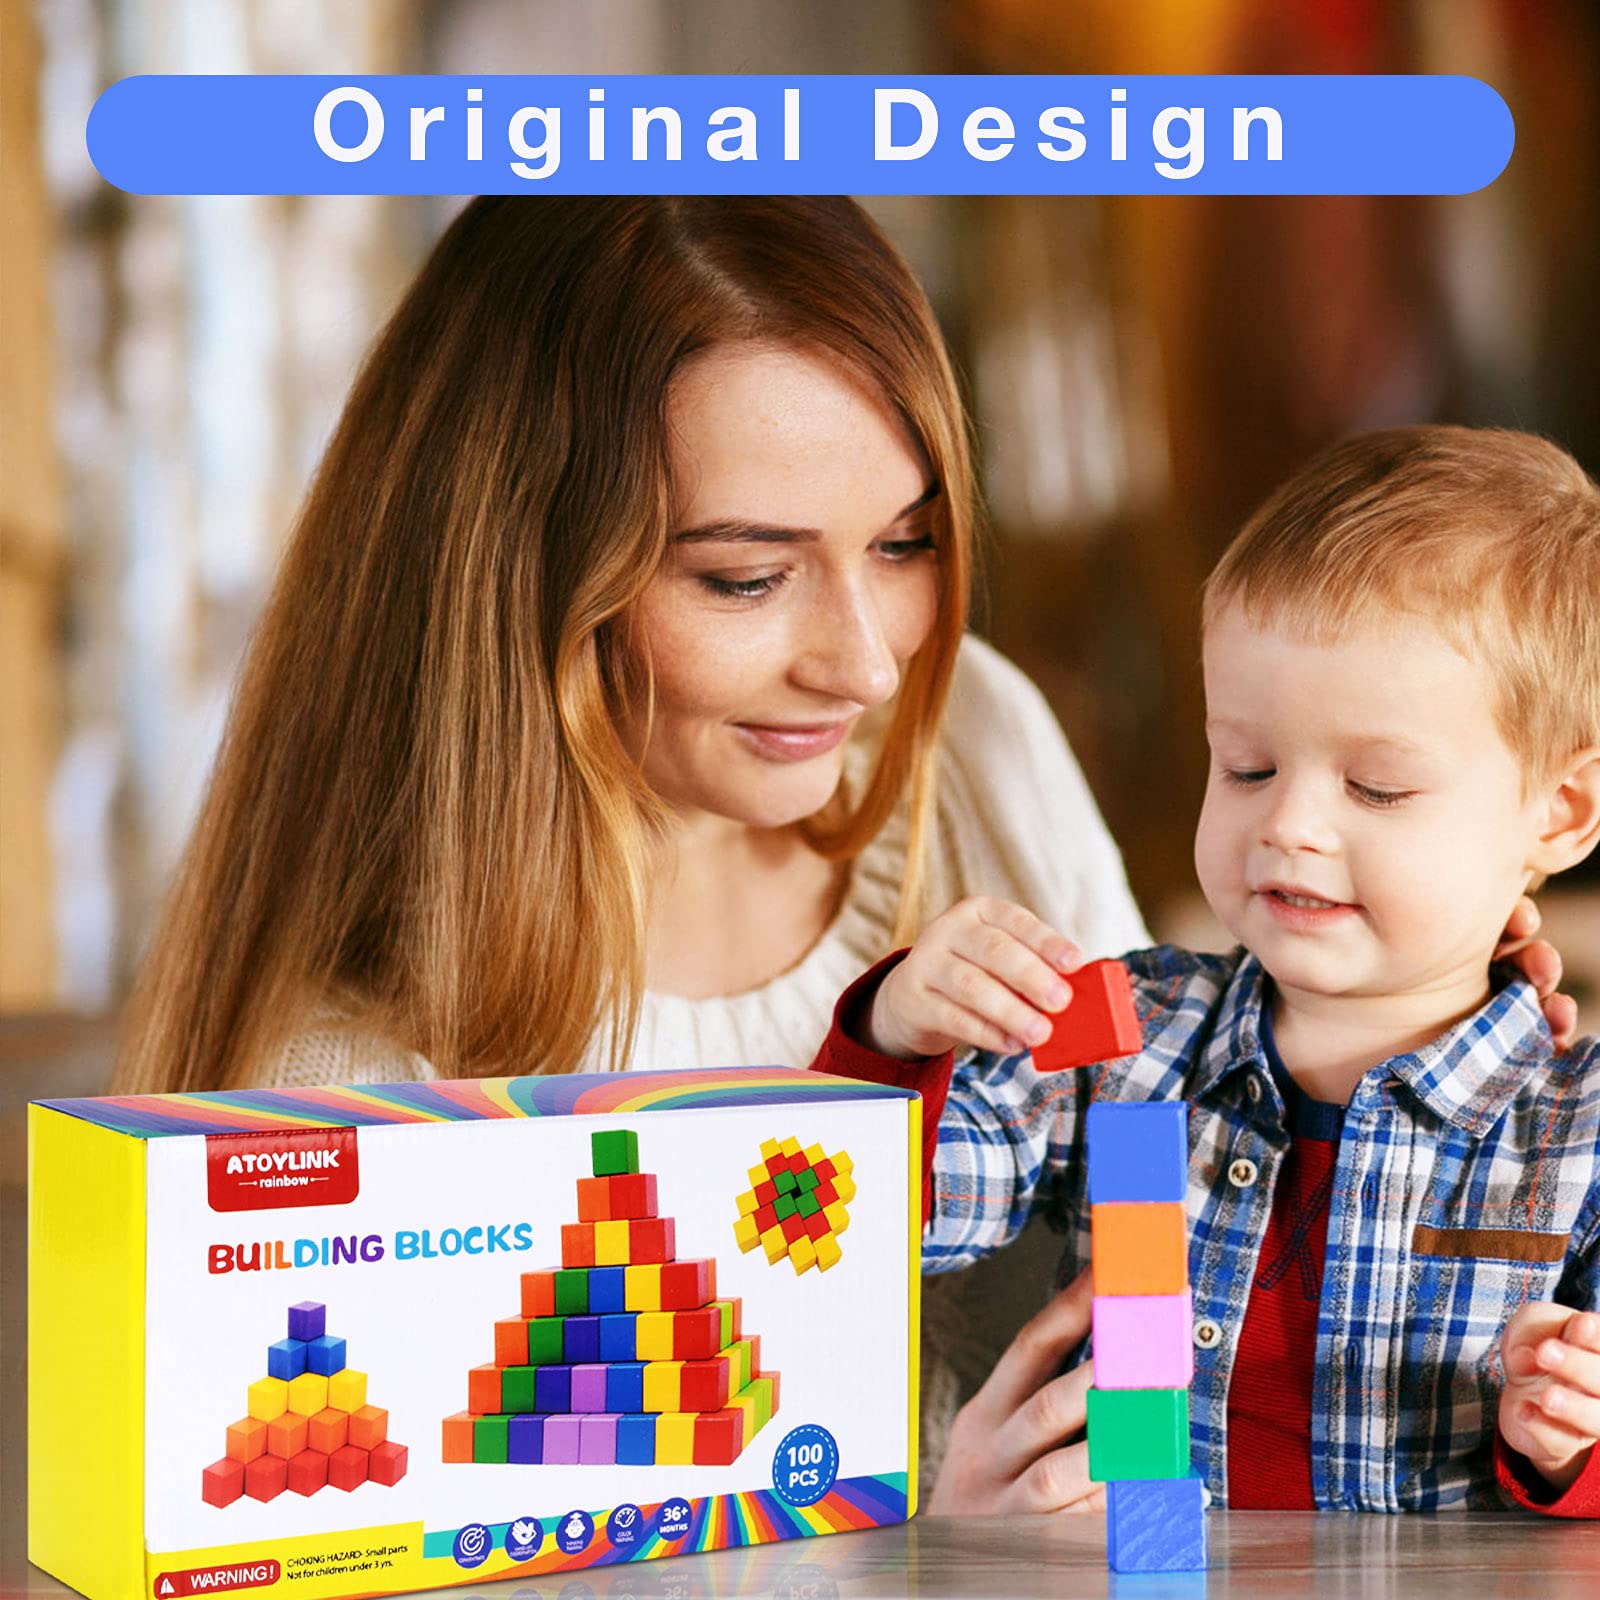 100PCS Wooden Building Blocks Stacking Game 1 Inch Rainbow Cubes Blocks Set Preschool Learning Educational Toys for Toddlers Boys Girls